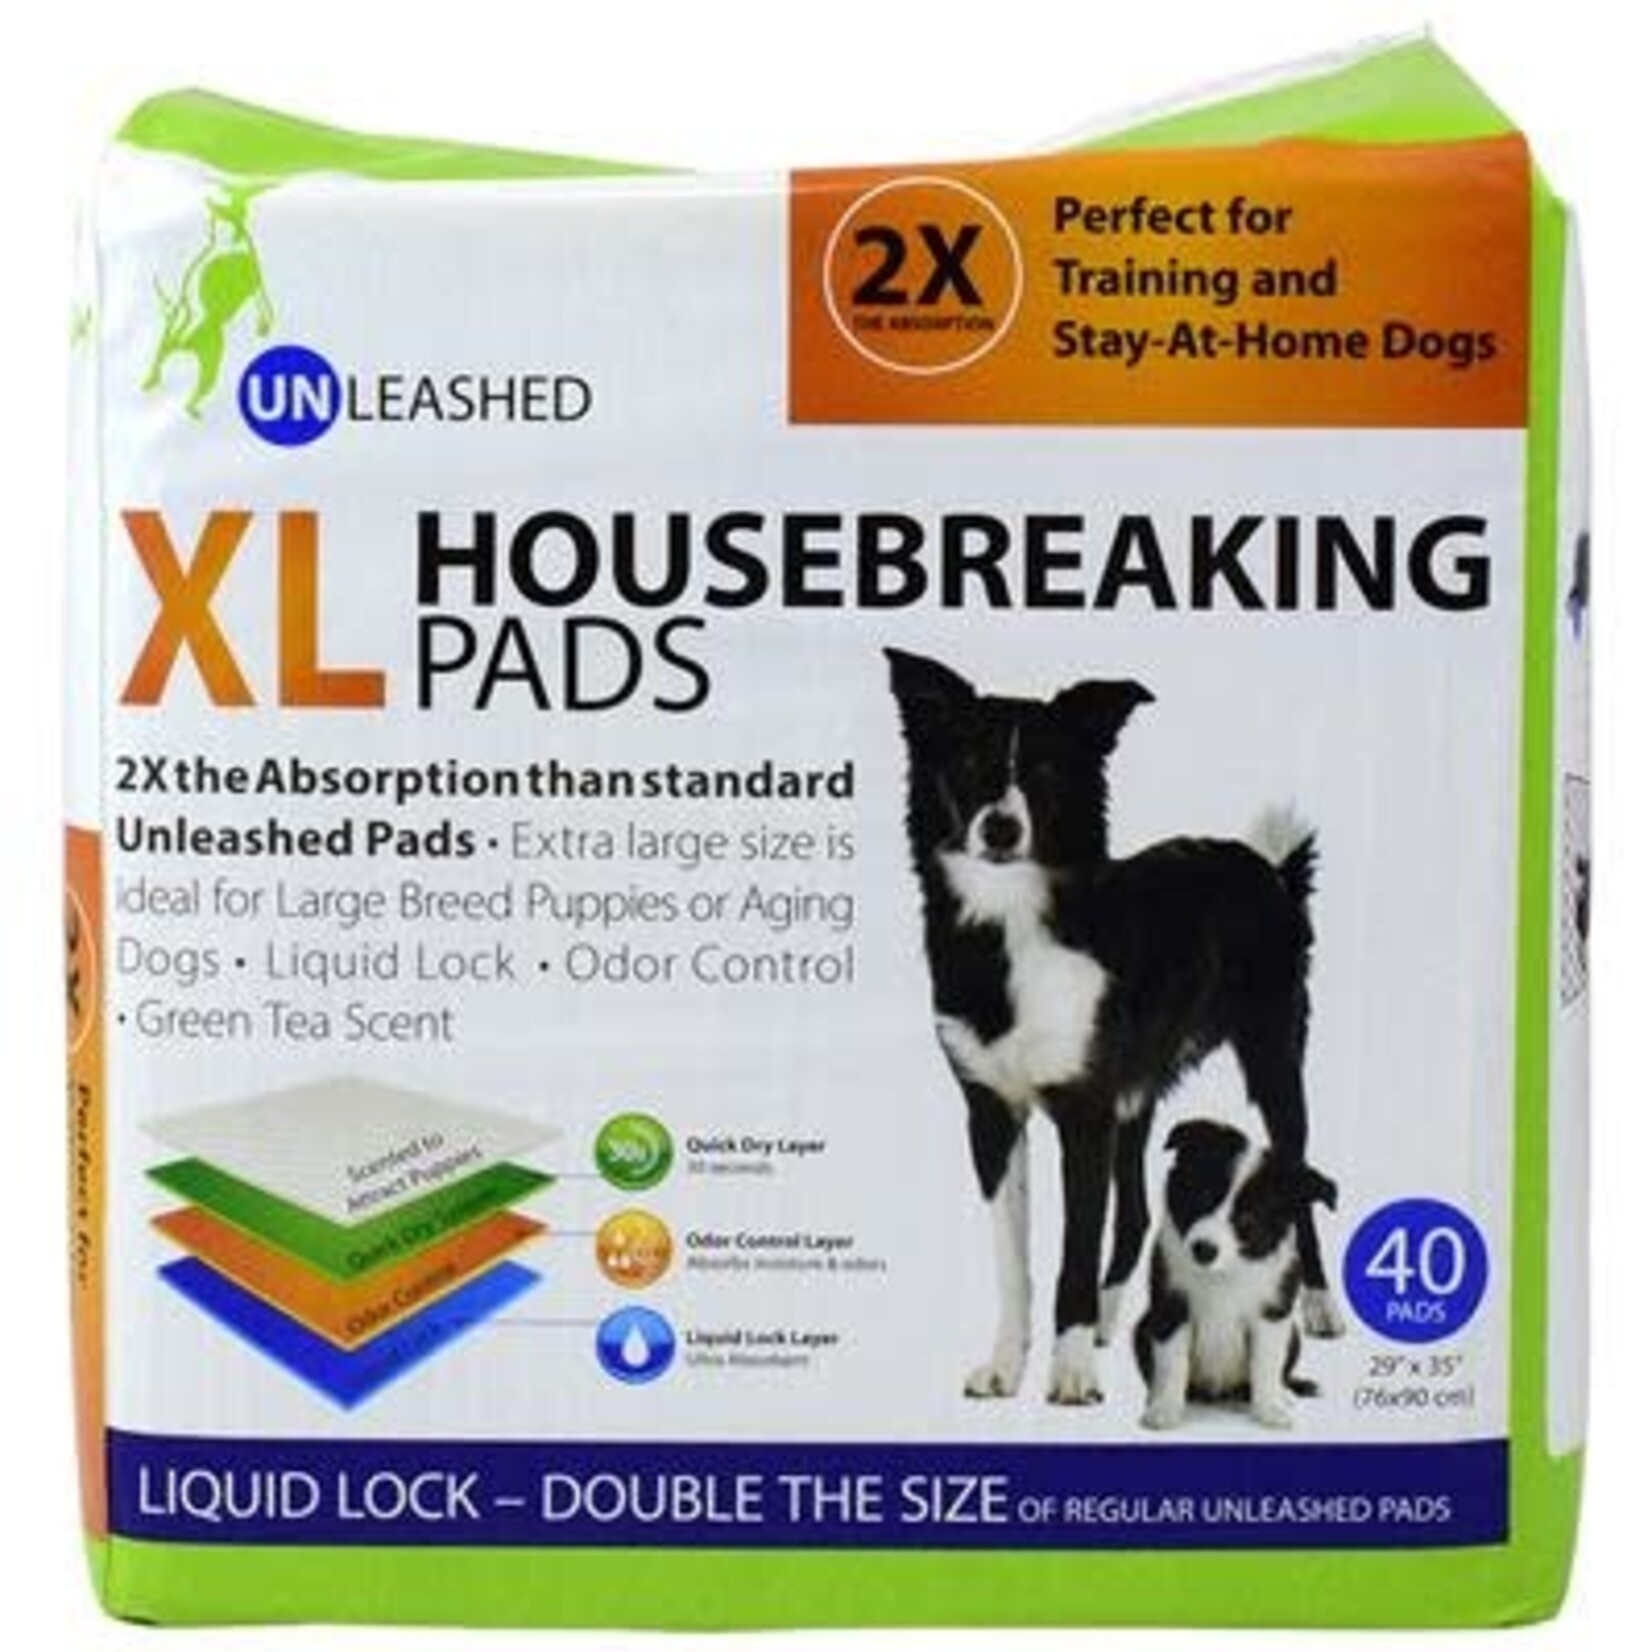 UNLEASHED UNLEASHED Housebreaking Pads XL 40pk